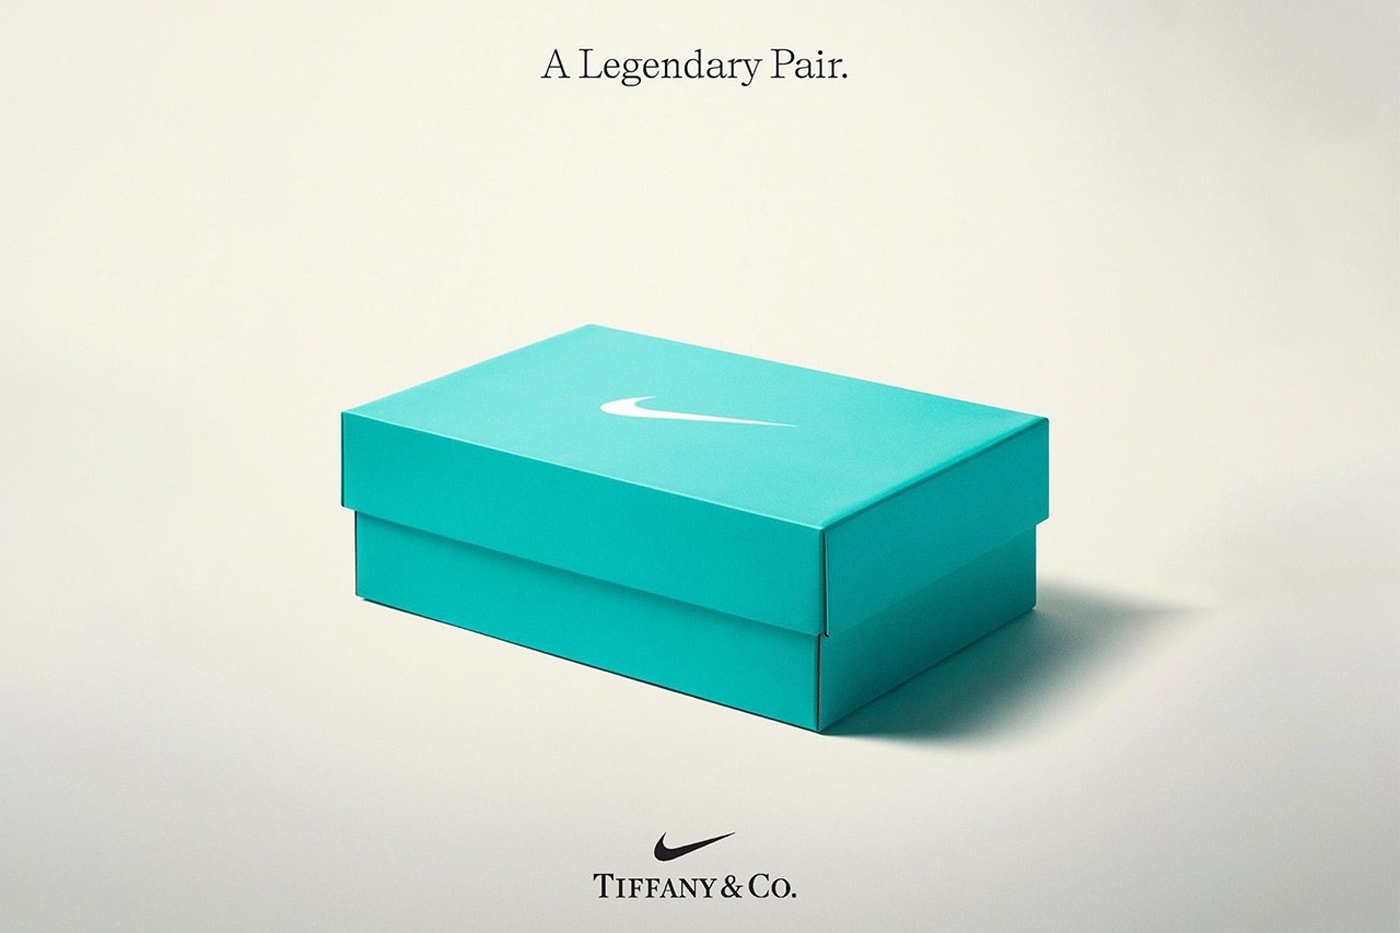 What Font Does Tiffany & Co Use?